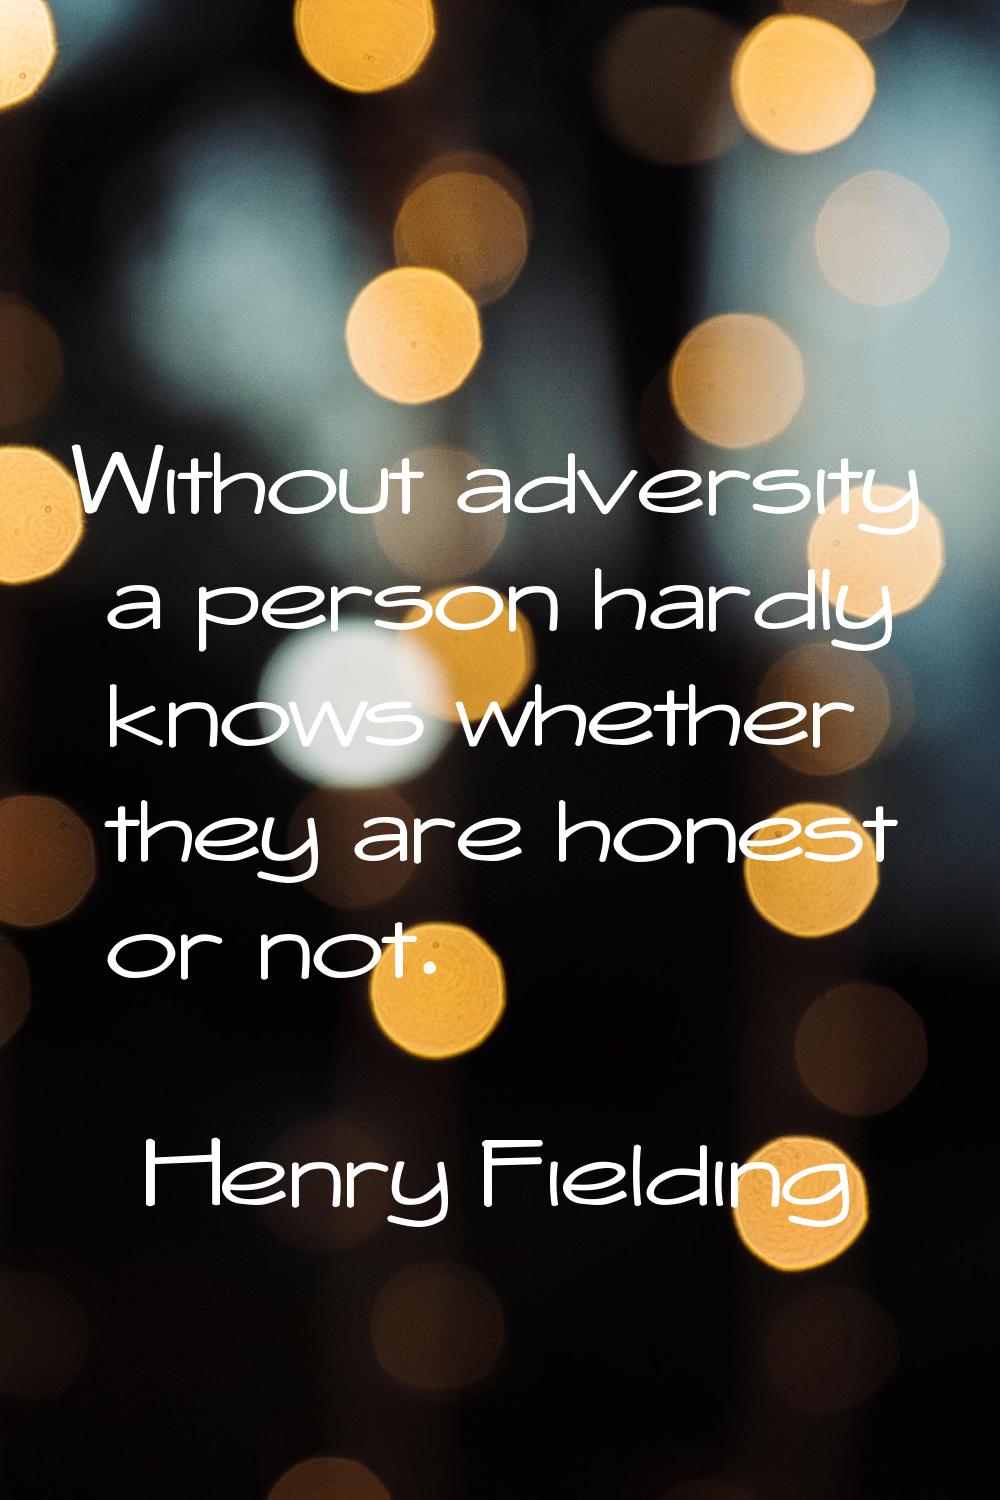 Without adversity a person hardly knows whether they are honest or not.